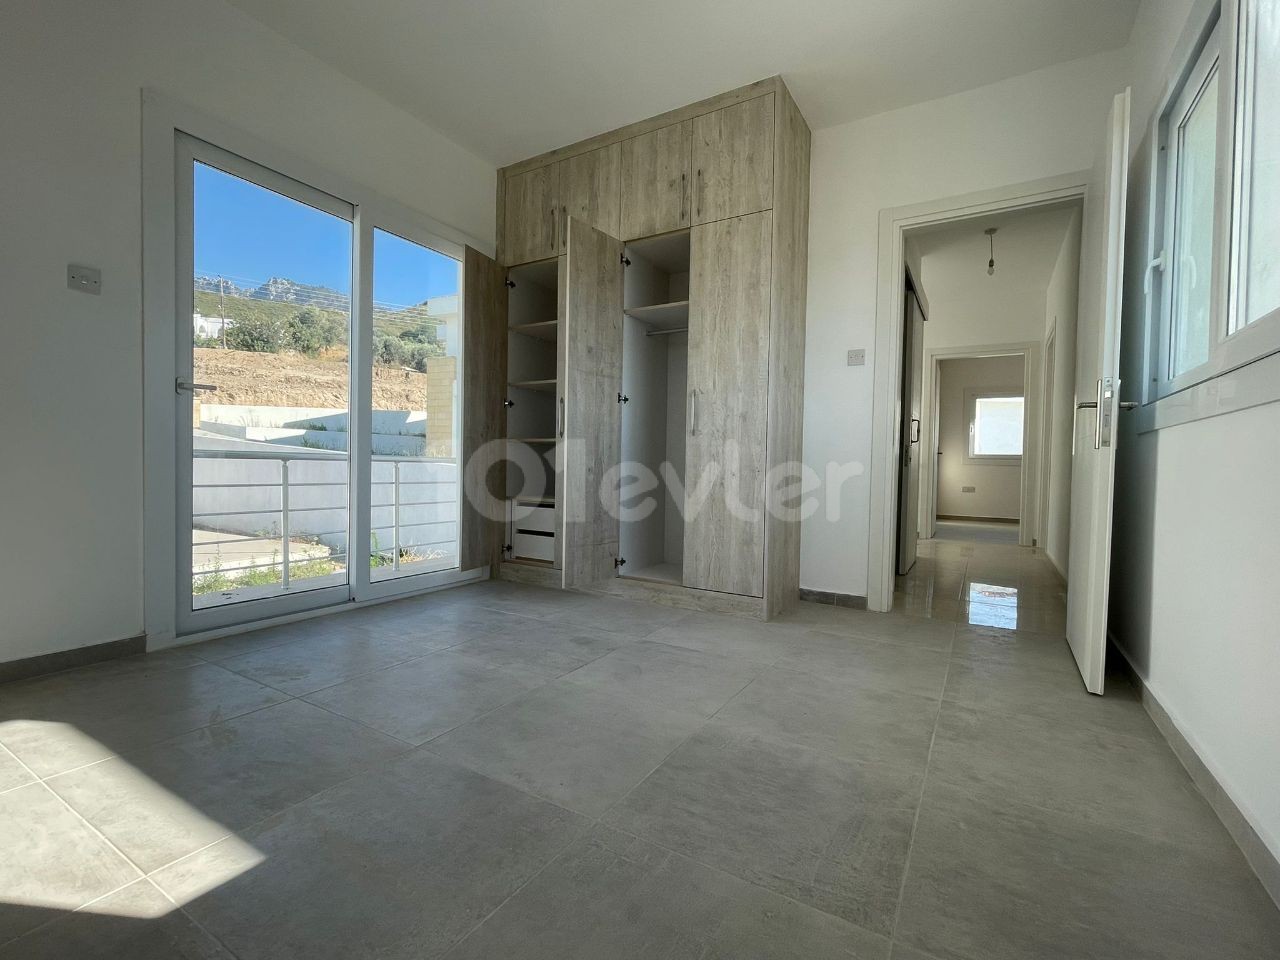 235,000Gbp with Ultralux Villa Pool in Kyrenia Yeşiltepe within 600 m2 215,000Gbp without Pool ** 